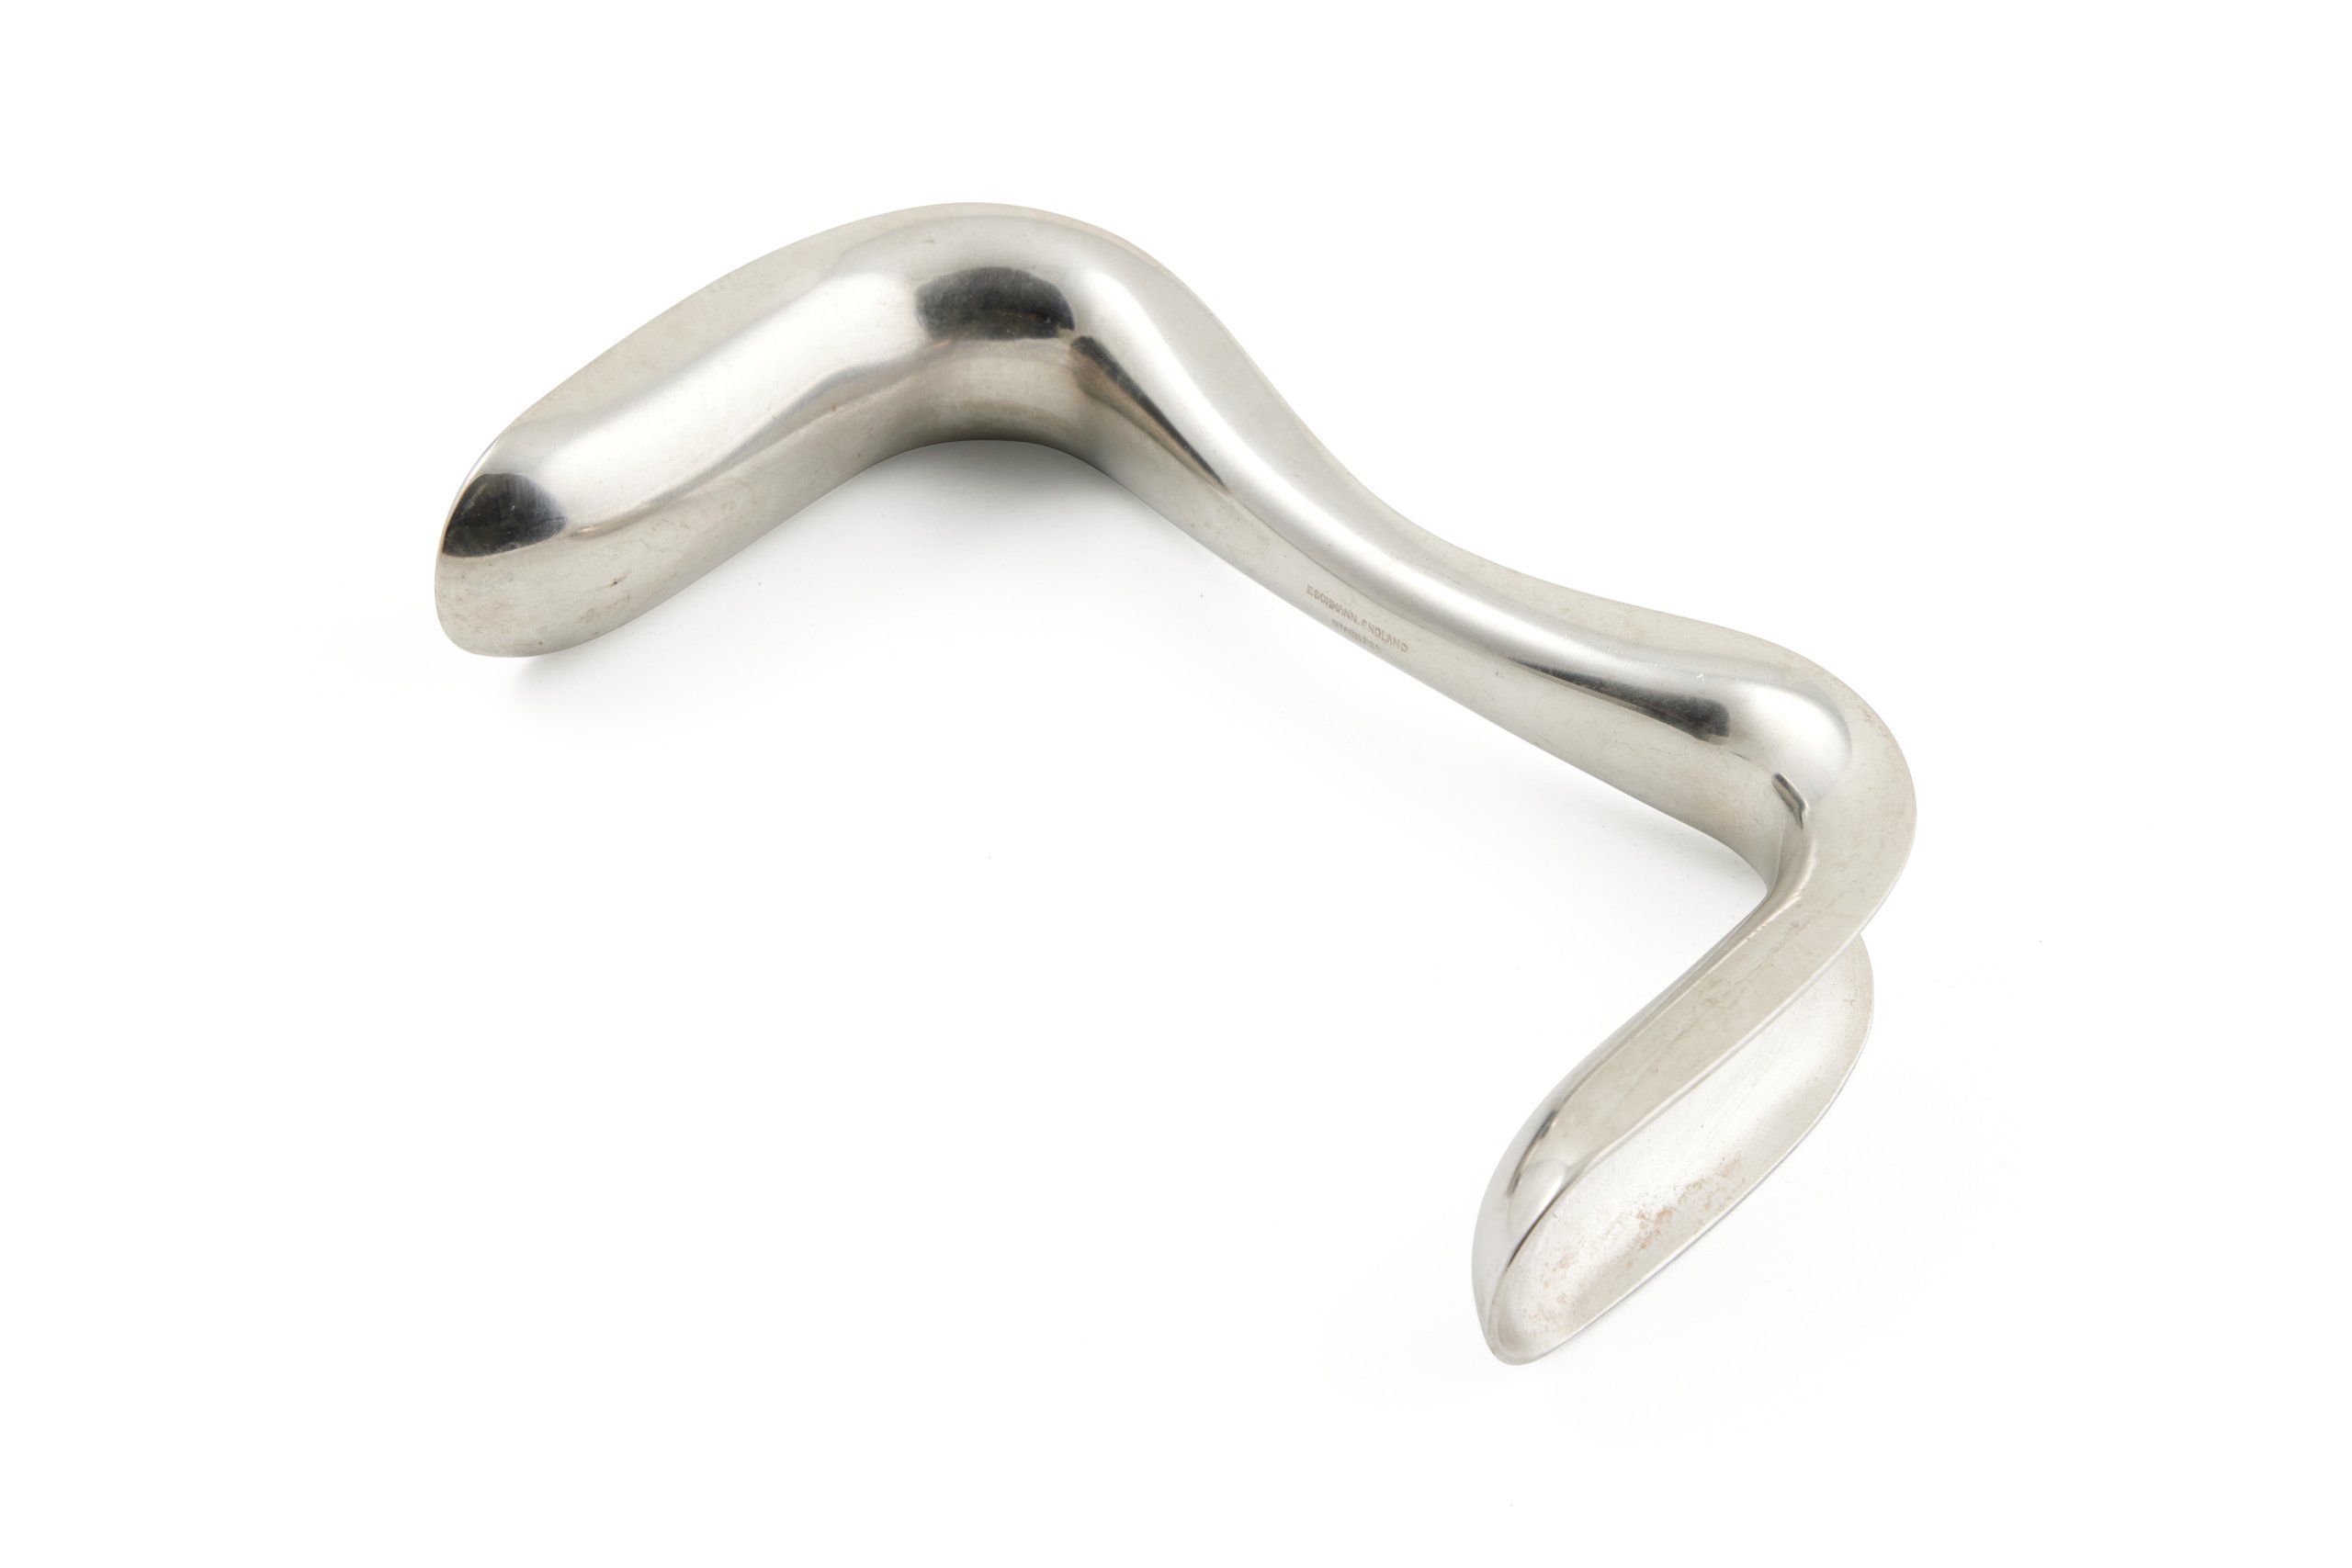 Sims speculum used by Dr Geoffrey Davis